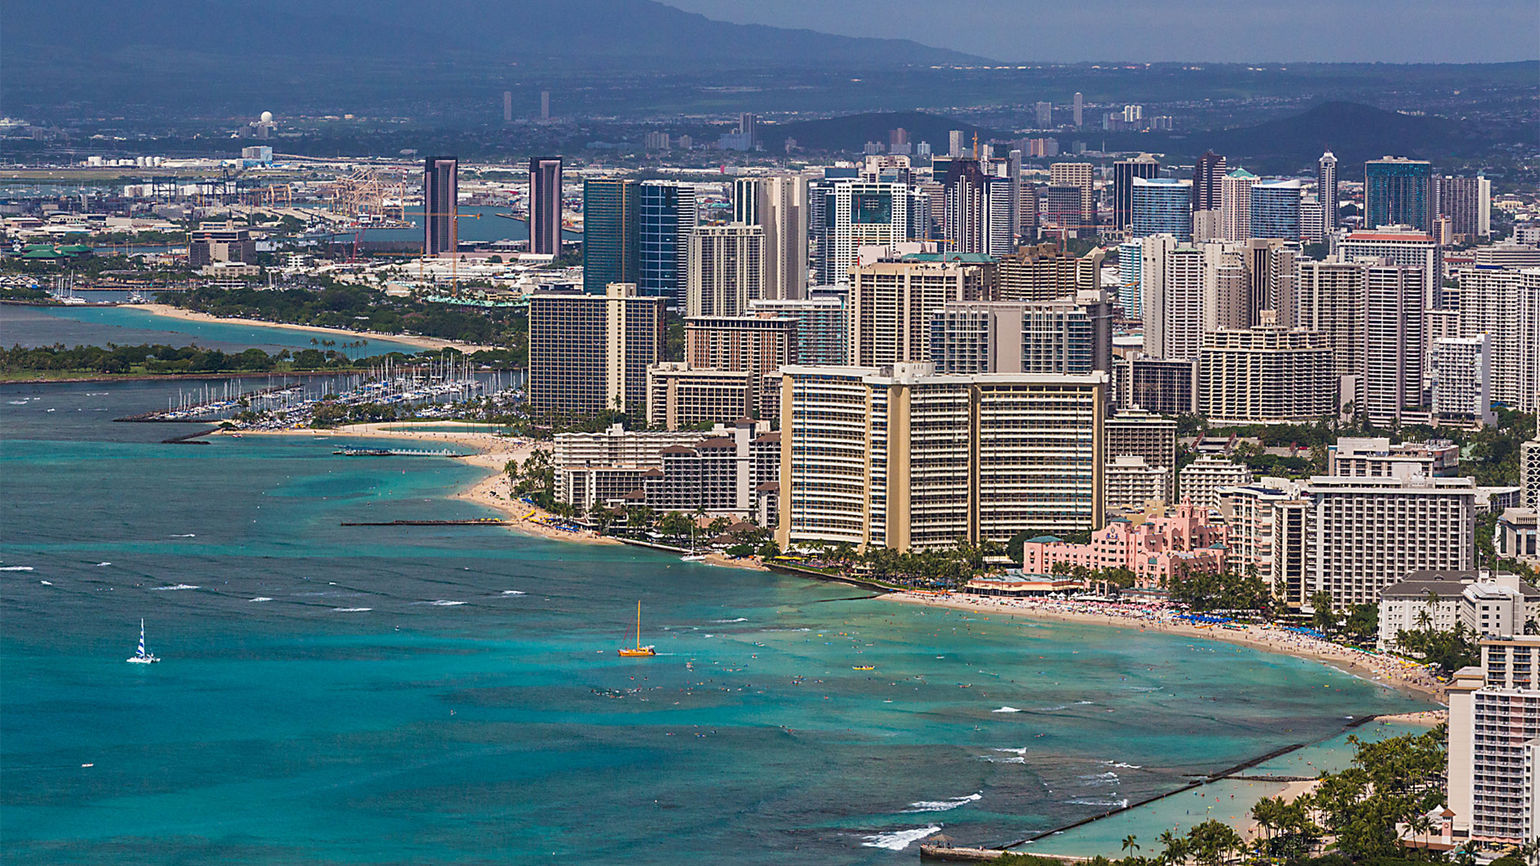 As visitors return, Hawaii's hoteliers hope for some stability